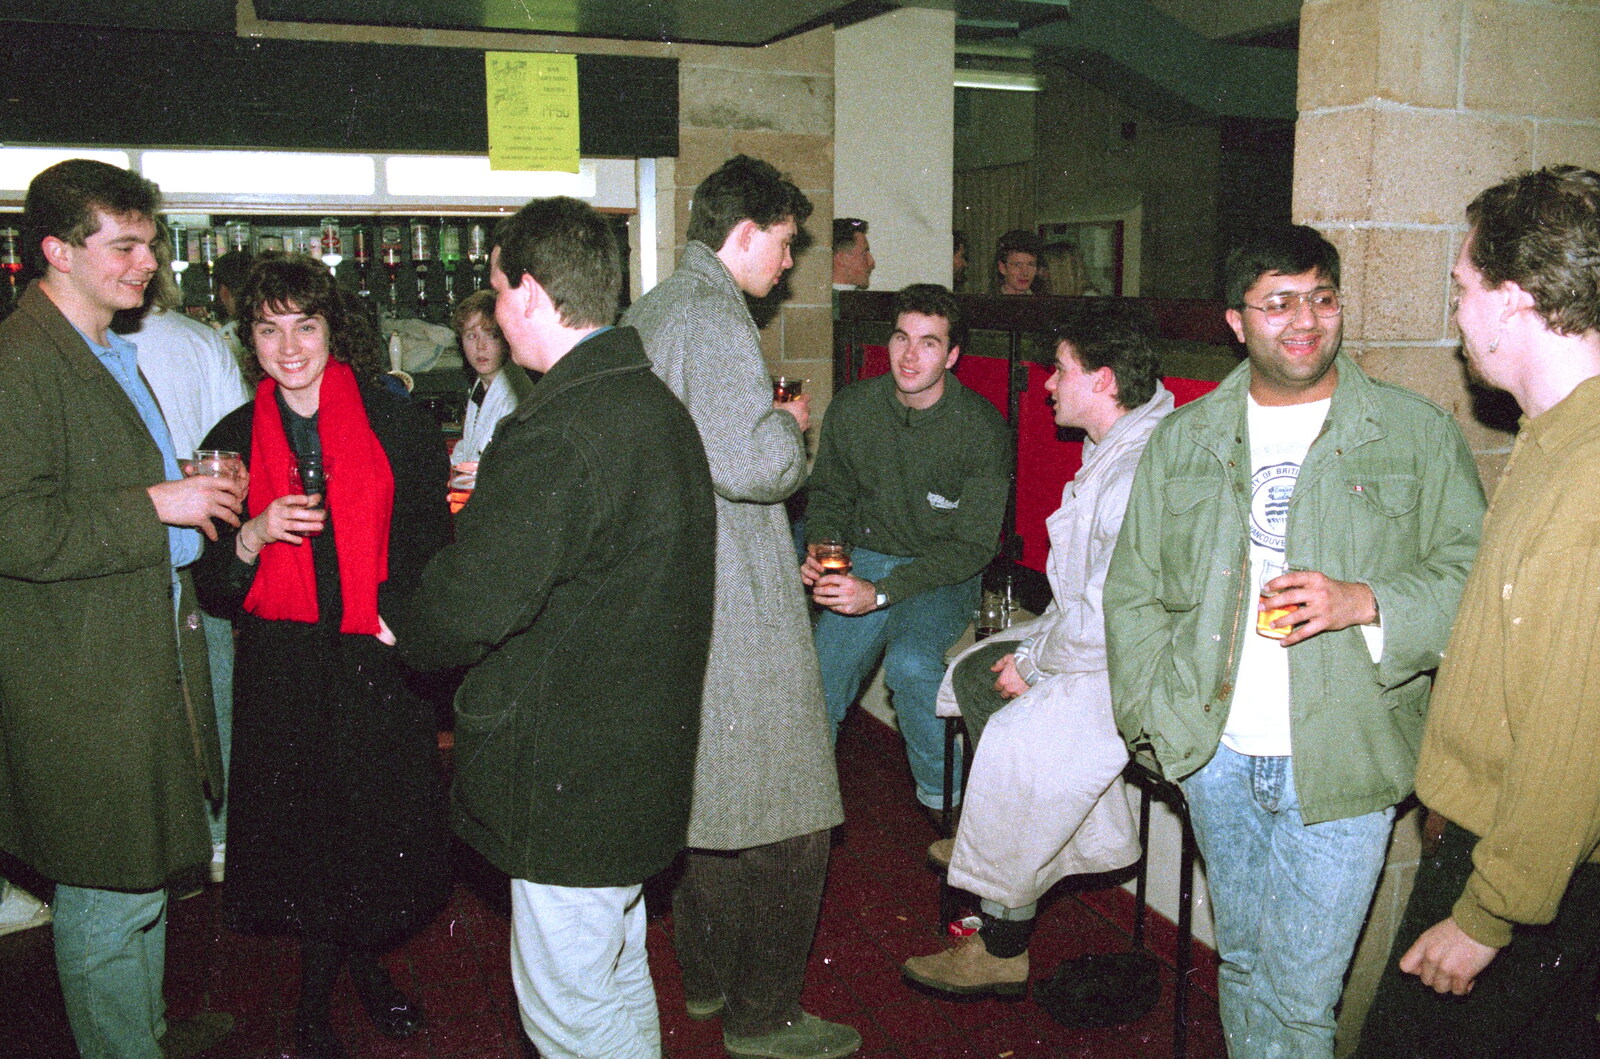 Frank chats to someone by the little bar from Uni: Scenes of Plymouth and the PPSU Bar, Plymouth Polytechnic, Devon - 28th April 1986